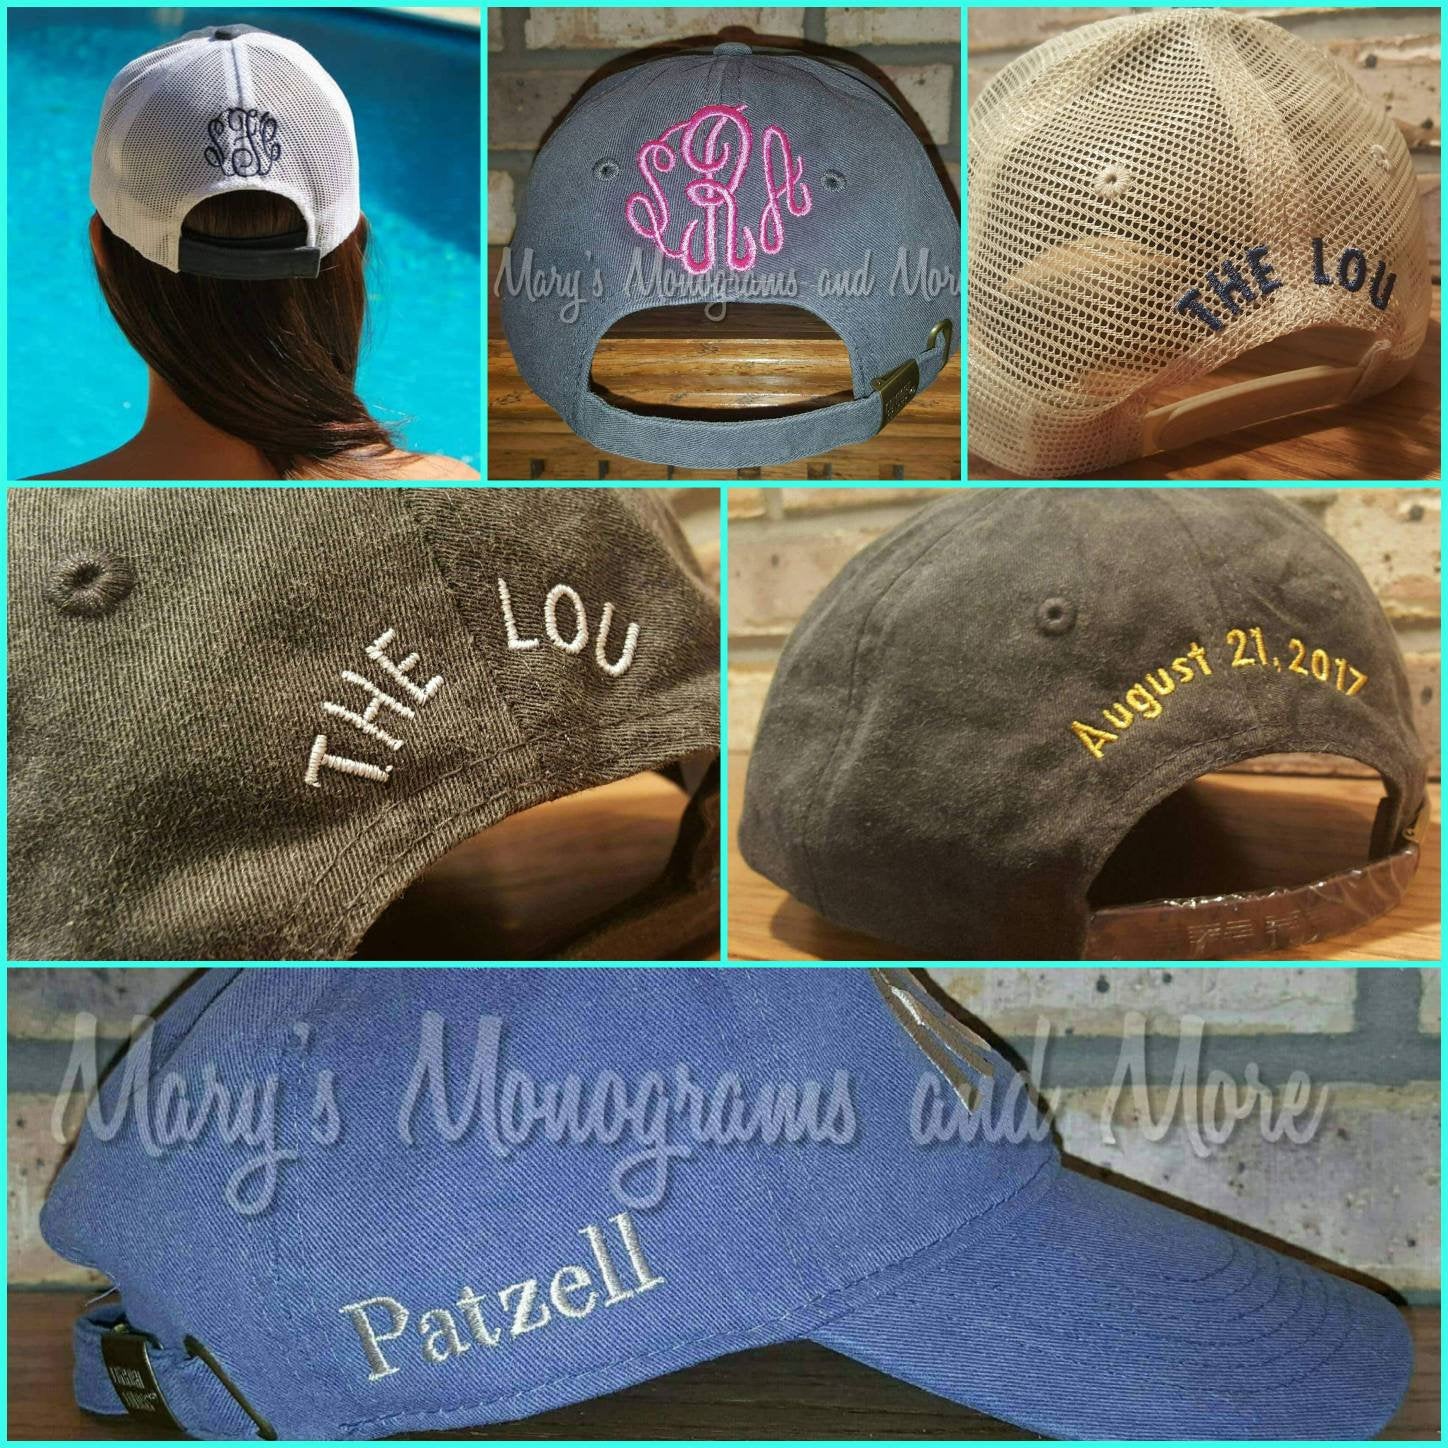 Beach Vacation Hat - No One Likes A Shady Beach, I'll Bring The Alcohol and Bad Decisions, Party, Girls Trip, Summer, BFF, Drinking, Cap